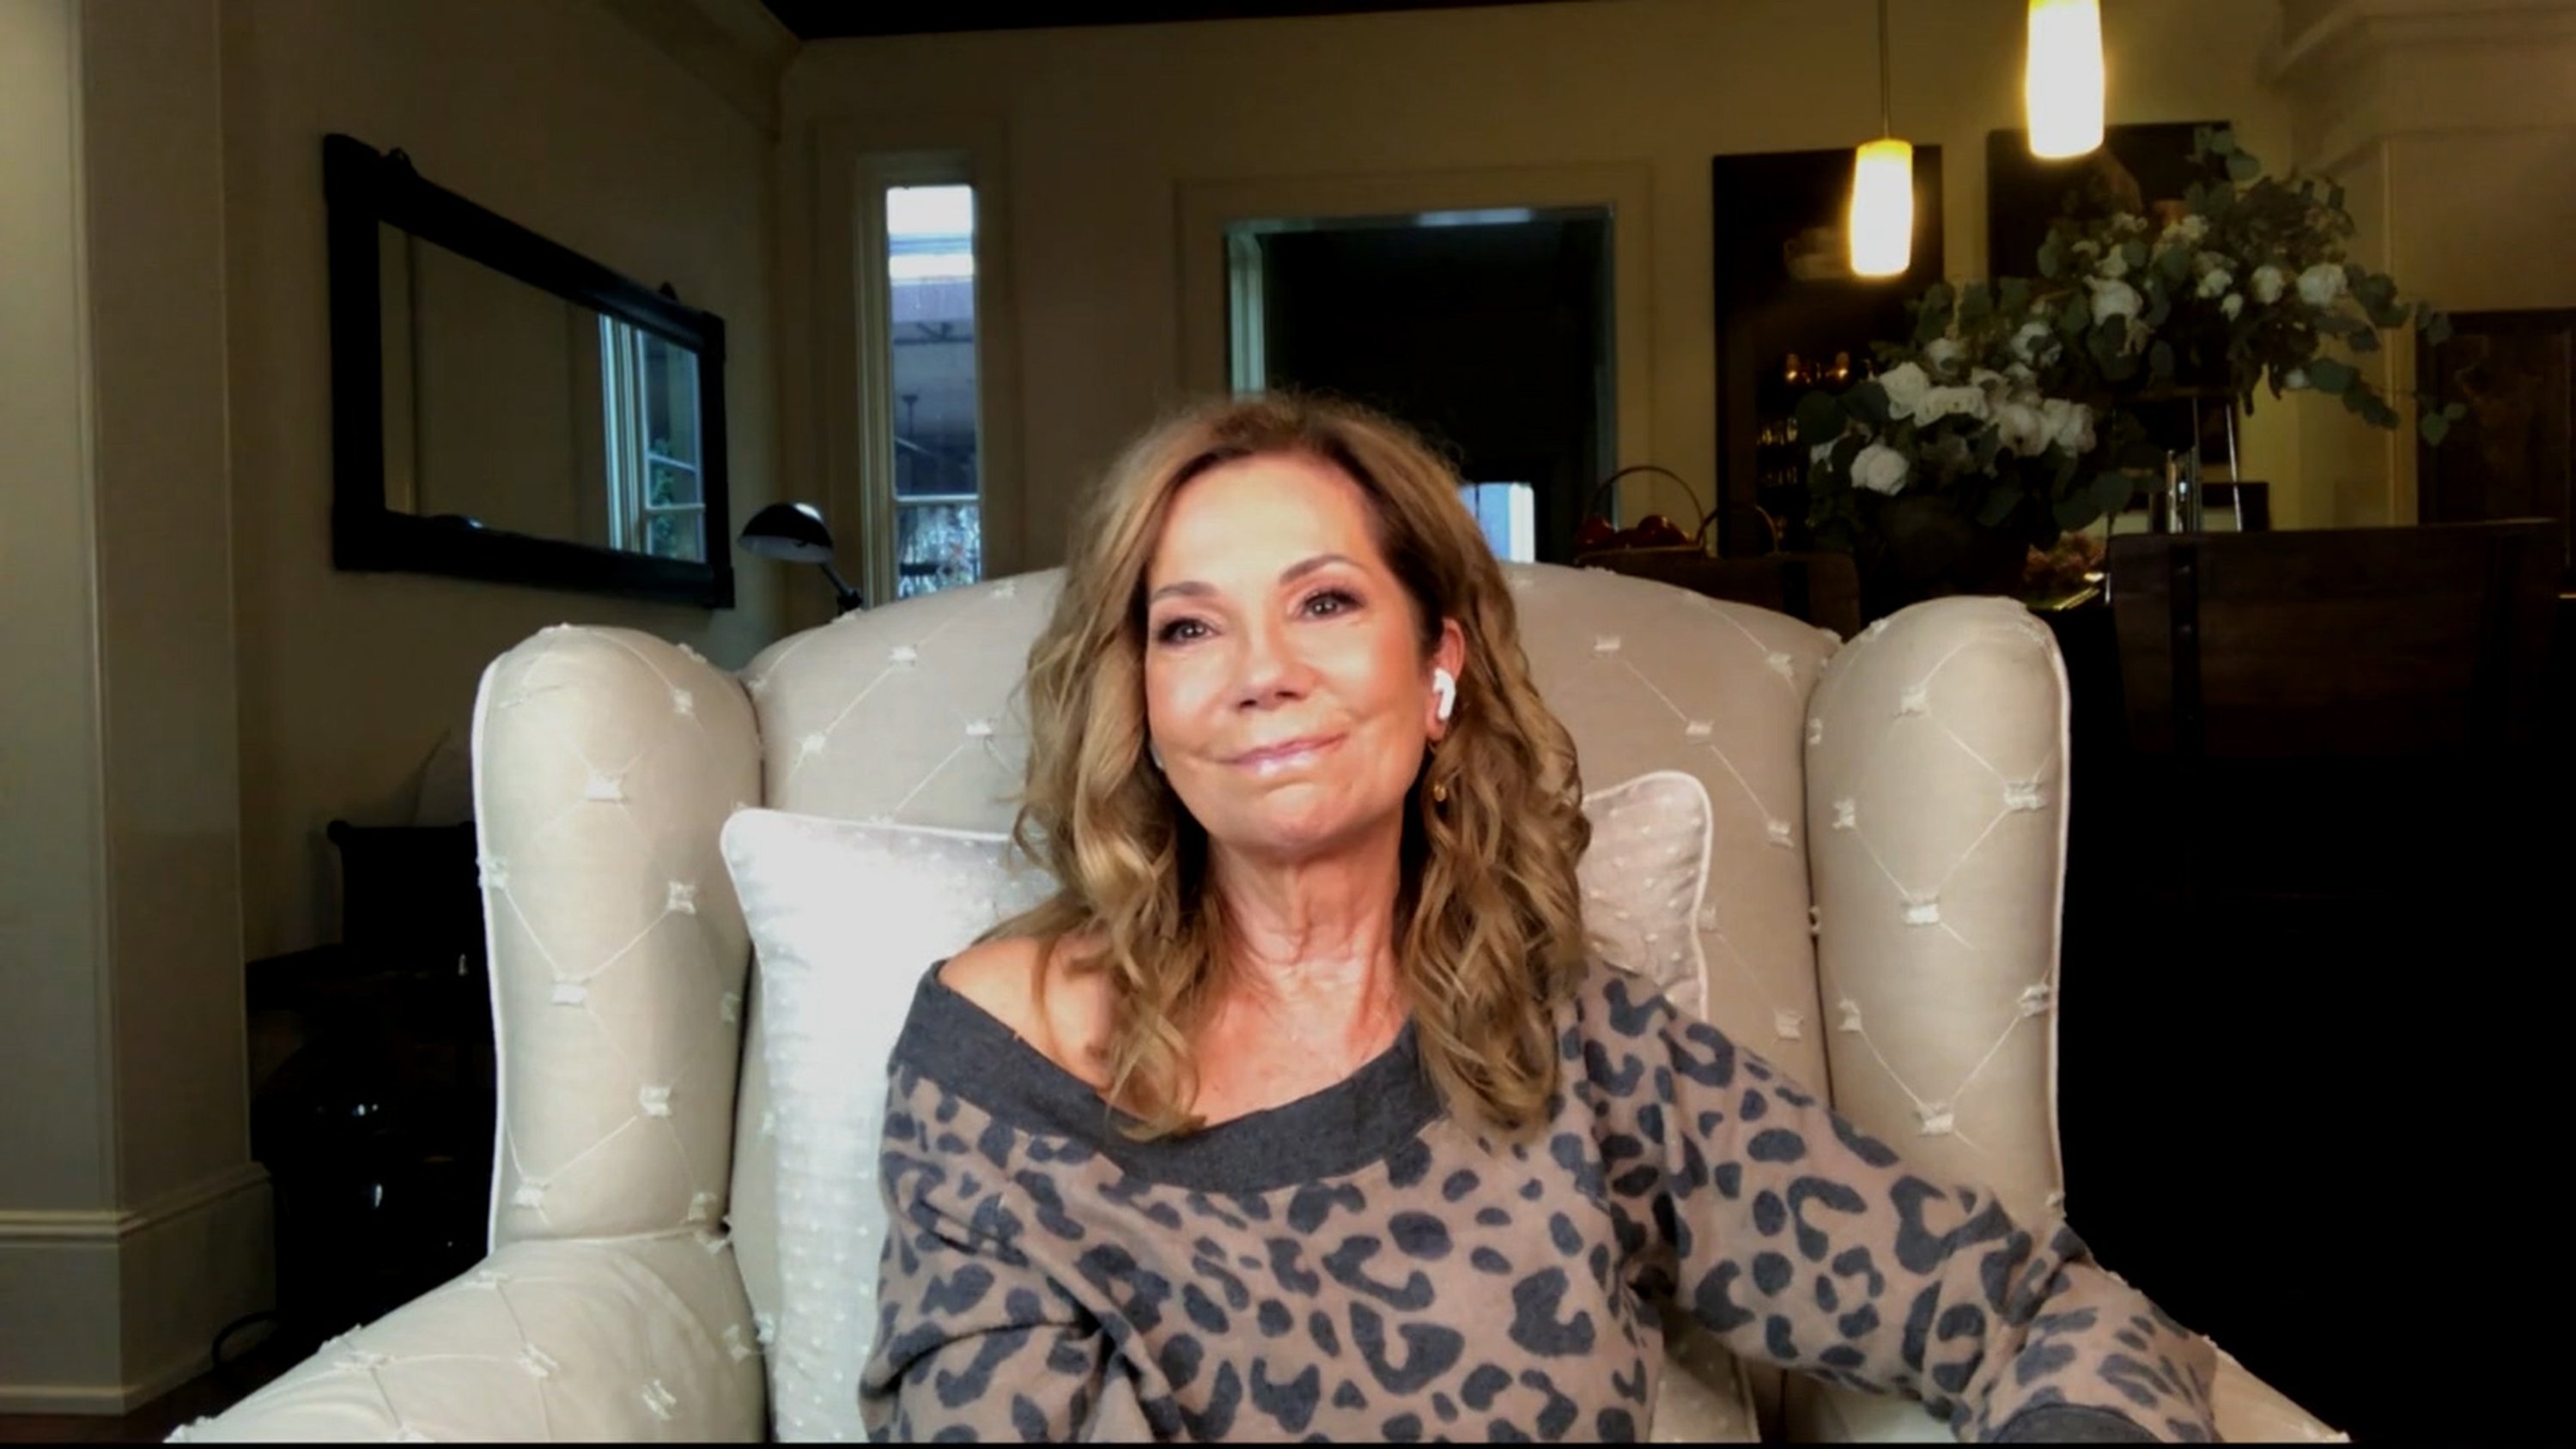 Kathie Lee Gifford in a spotted top sitting in a beige chair